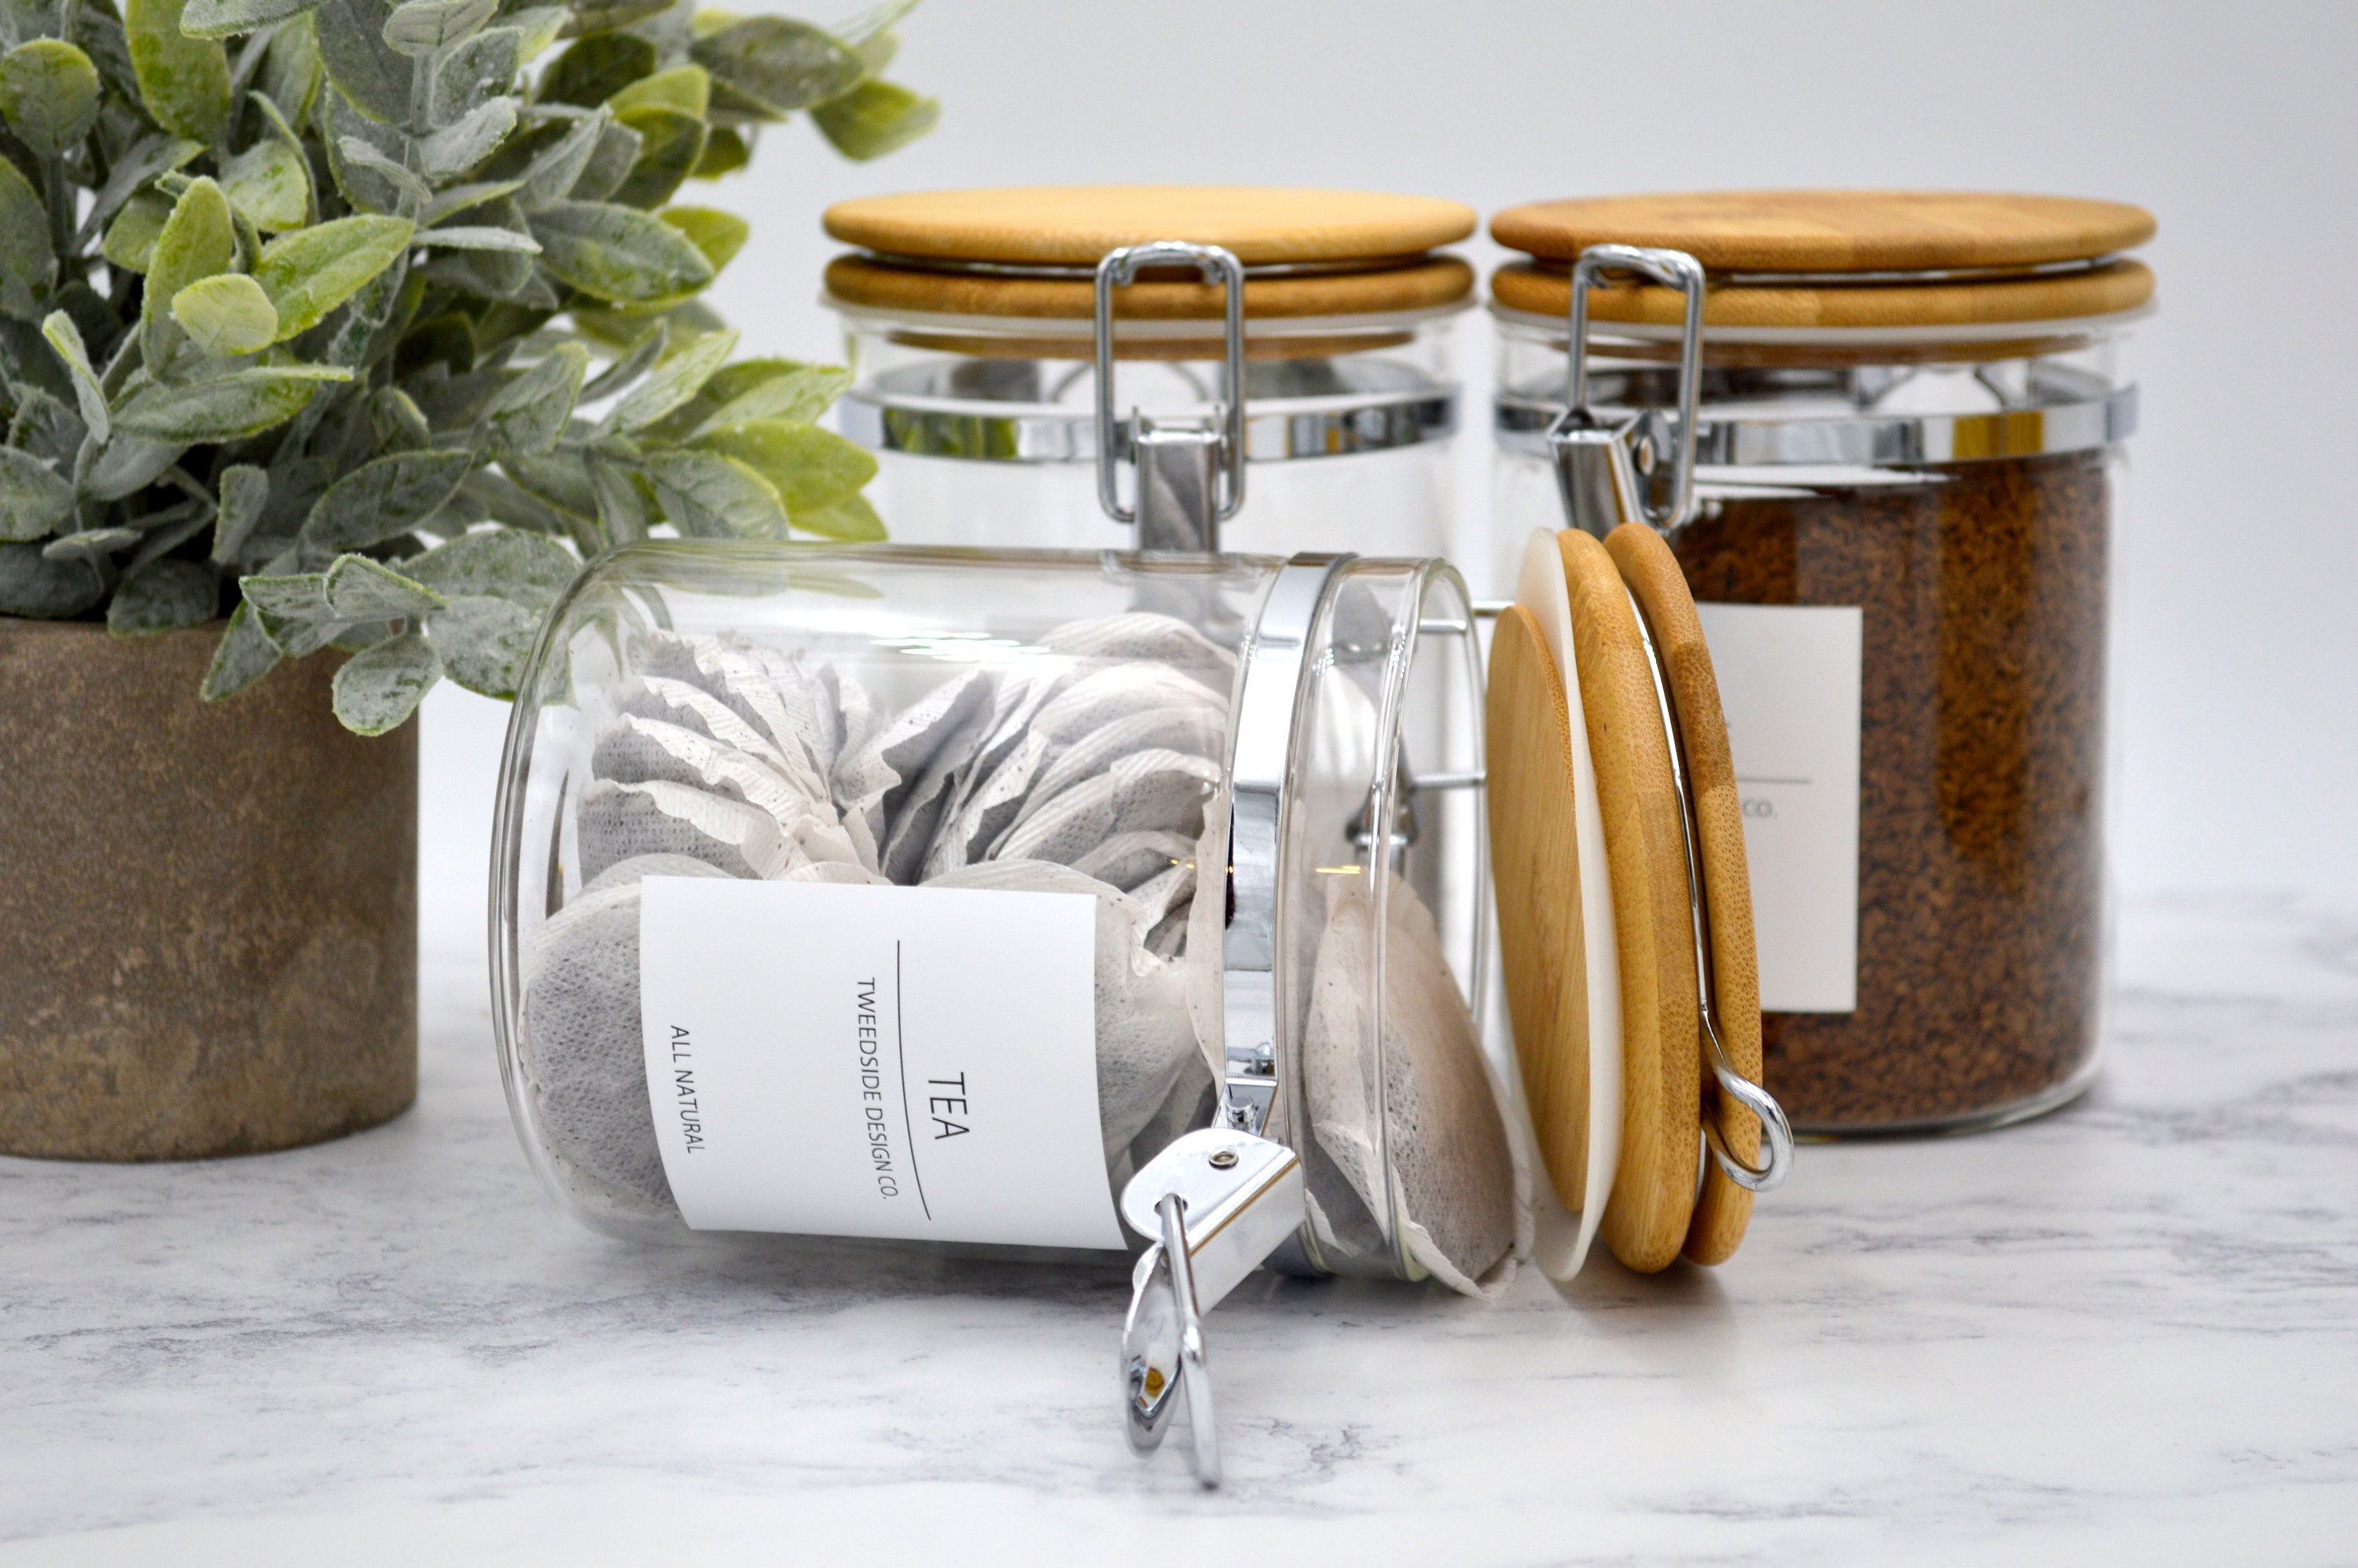 Square Glass and Bamboo Jar 1.75L, Kitchen Organisation